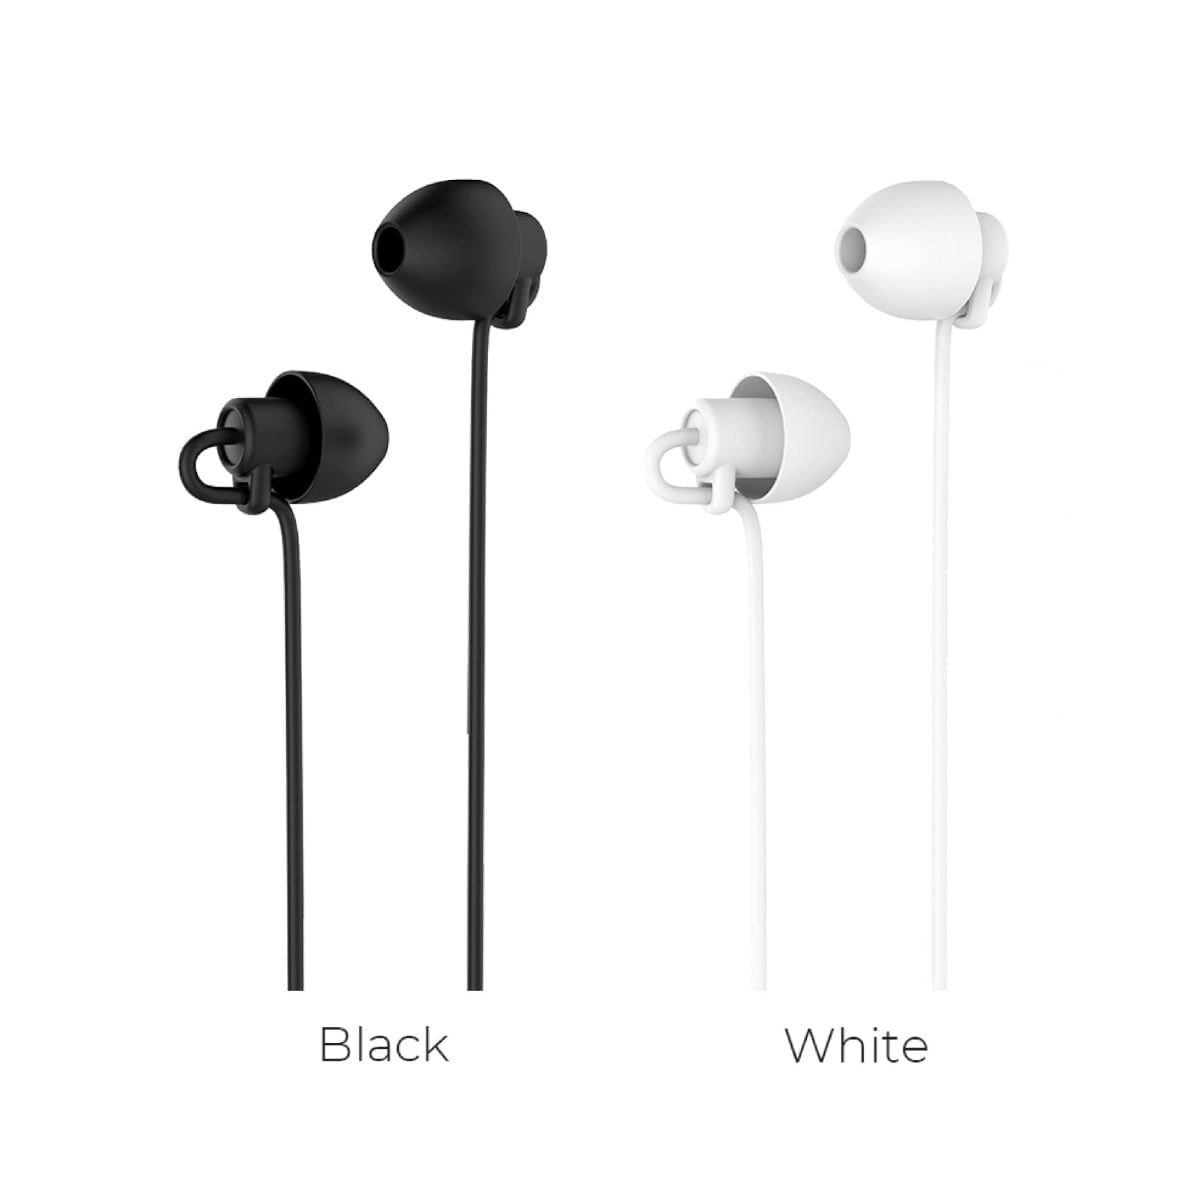 Earphone98 01 Scaled Hoco Material: Silica Gel, Tpe Enameled Wire Length: 1.2M, Weight: 10G Speaker: 6Mm Connector: 3.5Mm Microphone: With A Wheat Controller Wire Control: Single Button Control Silicone Material, Soft And Does Not Oppress The Ear, Suitable For Sleeping Silicon Sleep Earphones M56 Earphone Wired Headphones With Mic – White Silicon Sleep Earphones M56 Earphone Wired Headphones With Mic – White